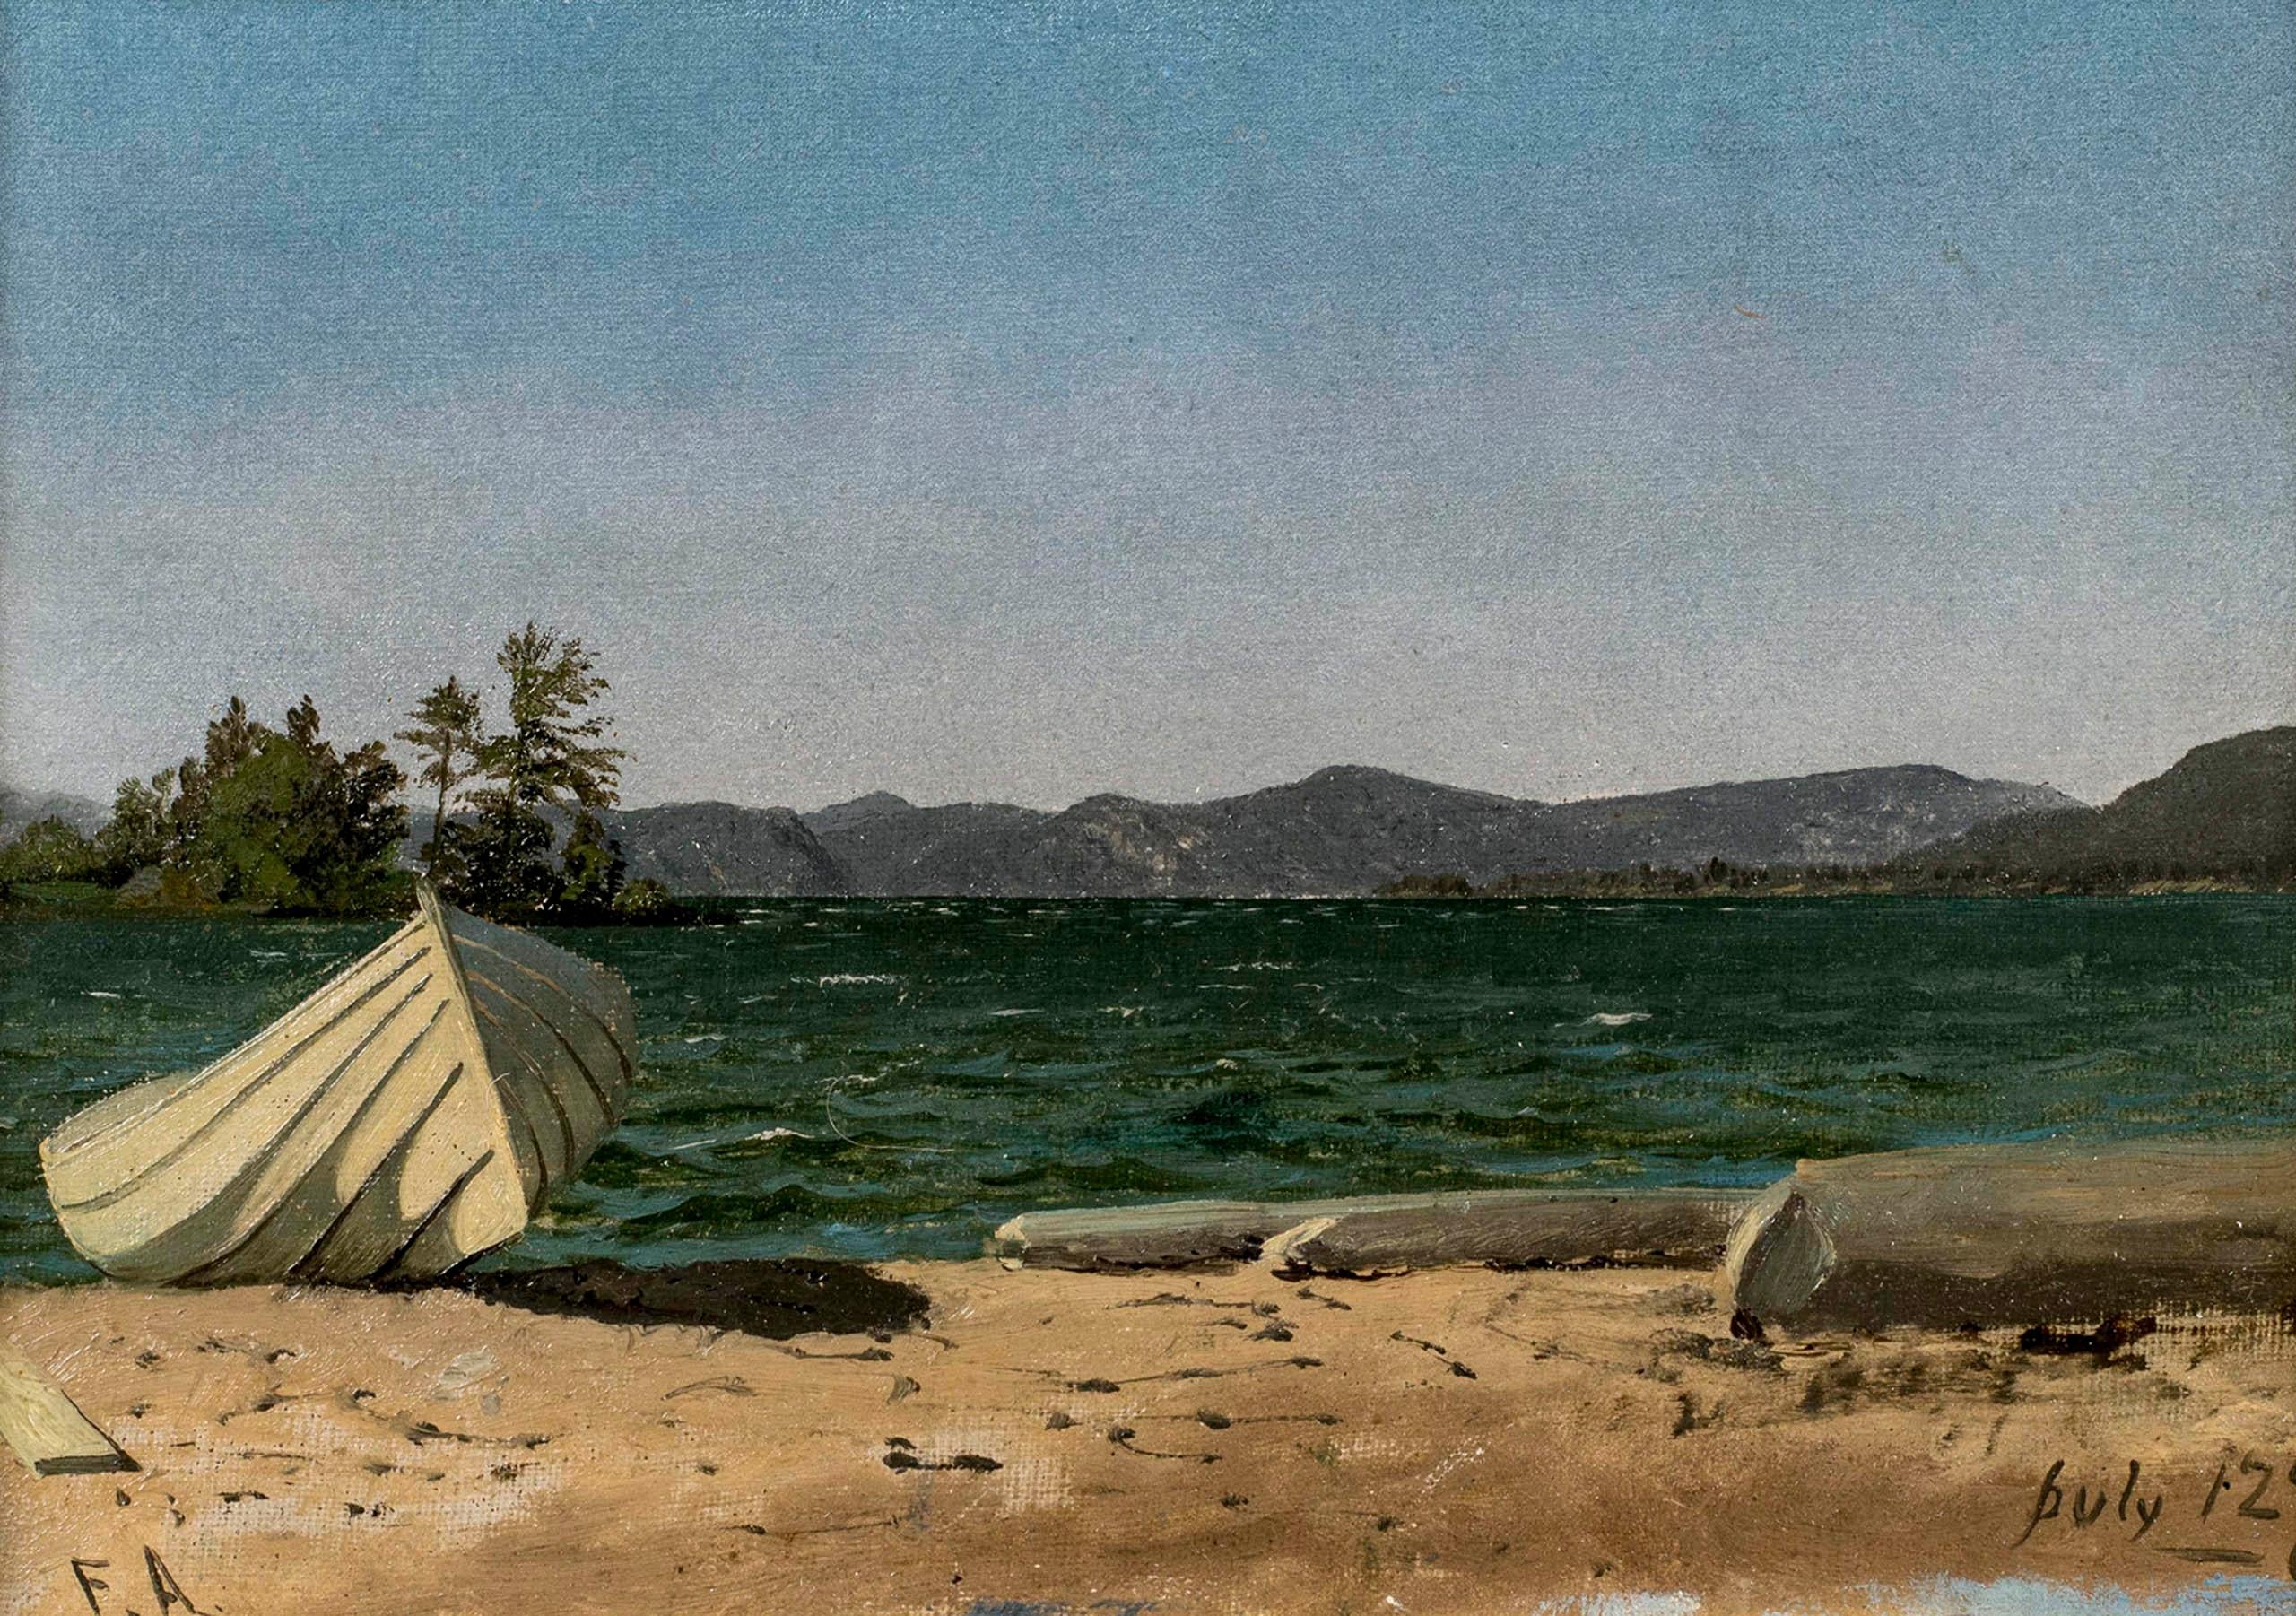 Frank Anderson (1844-1891)
Lake George, July 21, 1867
Oil on canvas mounted to board
7 x 9 3/4 inches
Signed lower left; dated lower right

In July of 1879, a writer for The Art Critic declared that Frank Anderson was, “without doubt one of the best